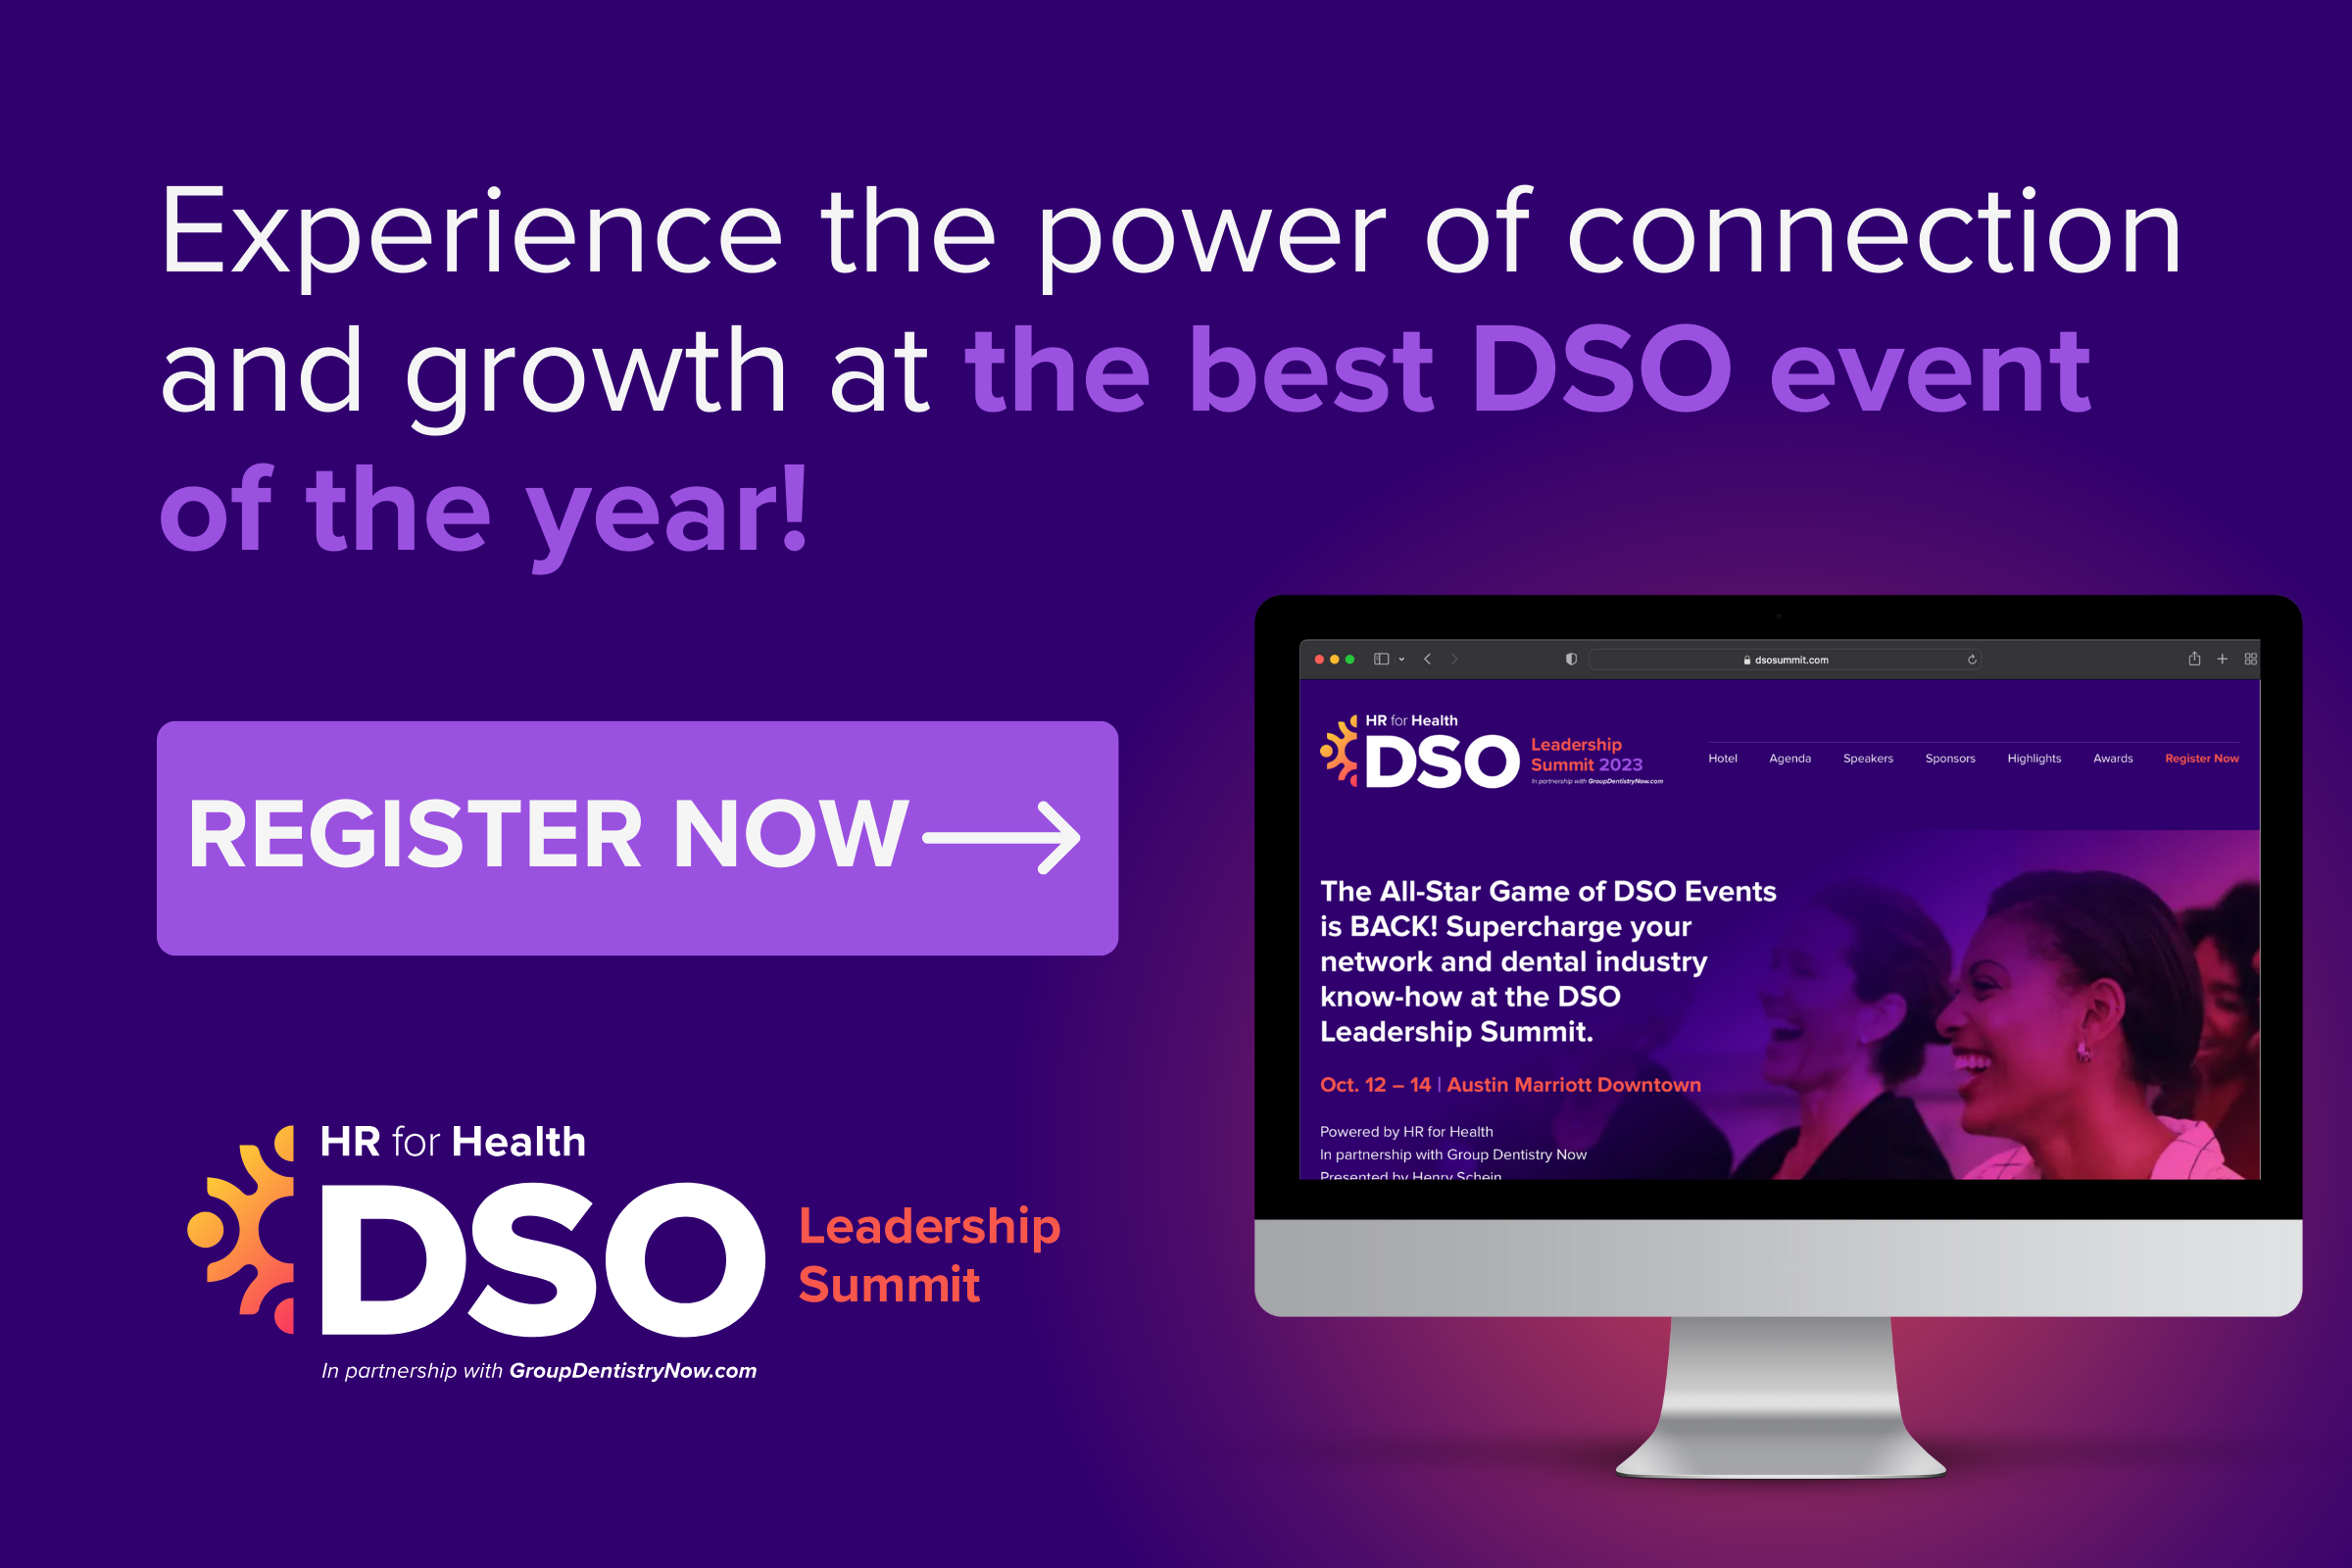 Experience the power of connection and growth at the best DSO event of the year!